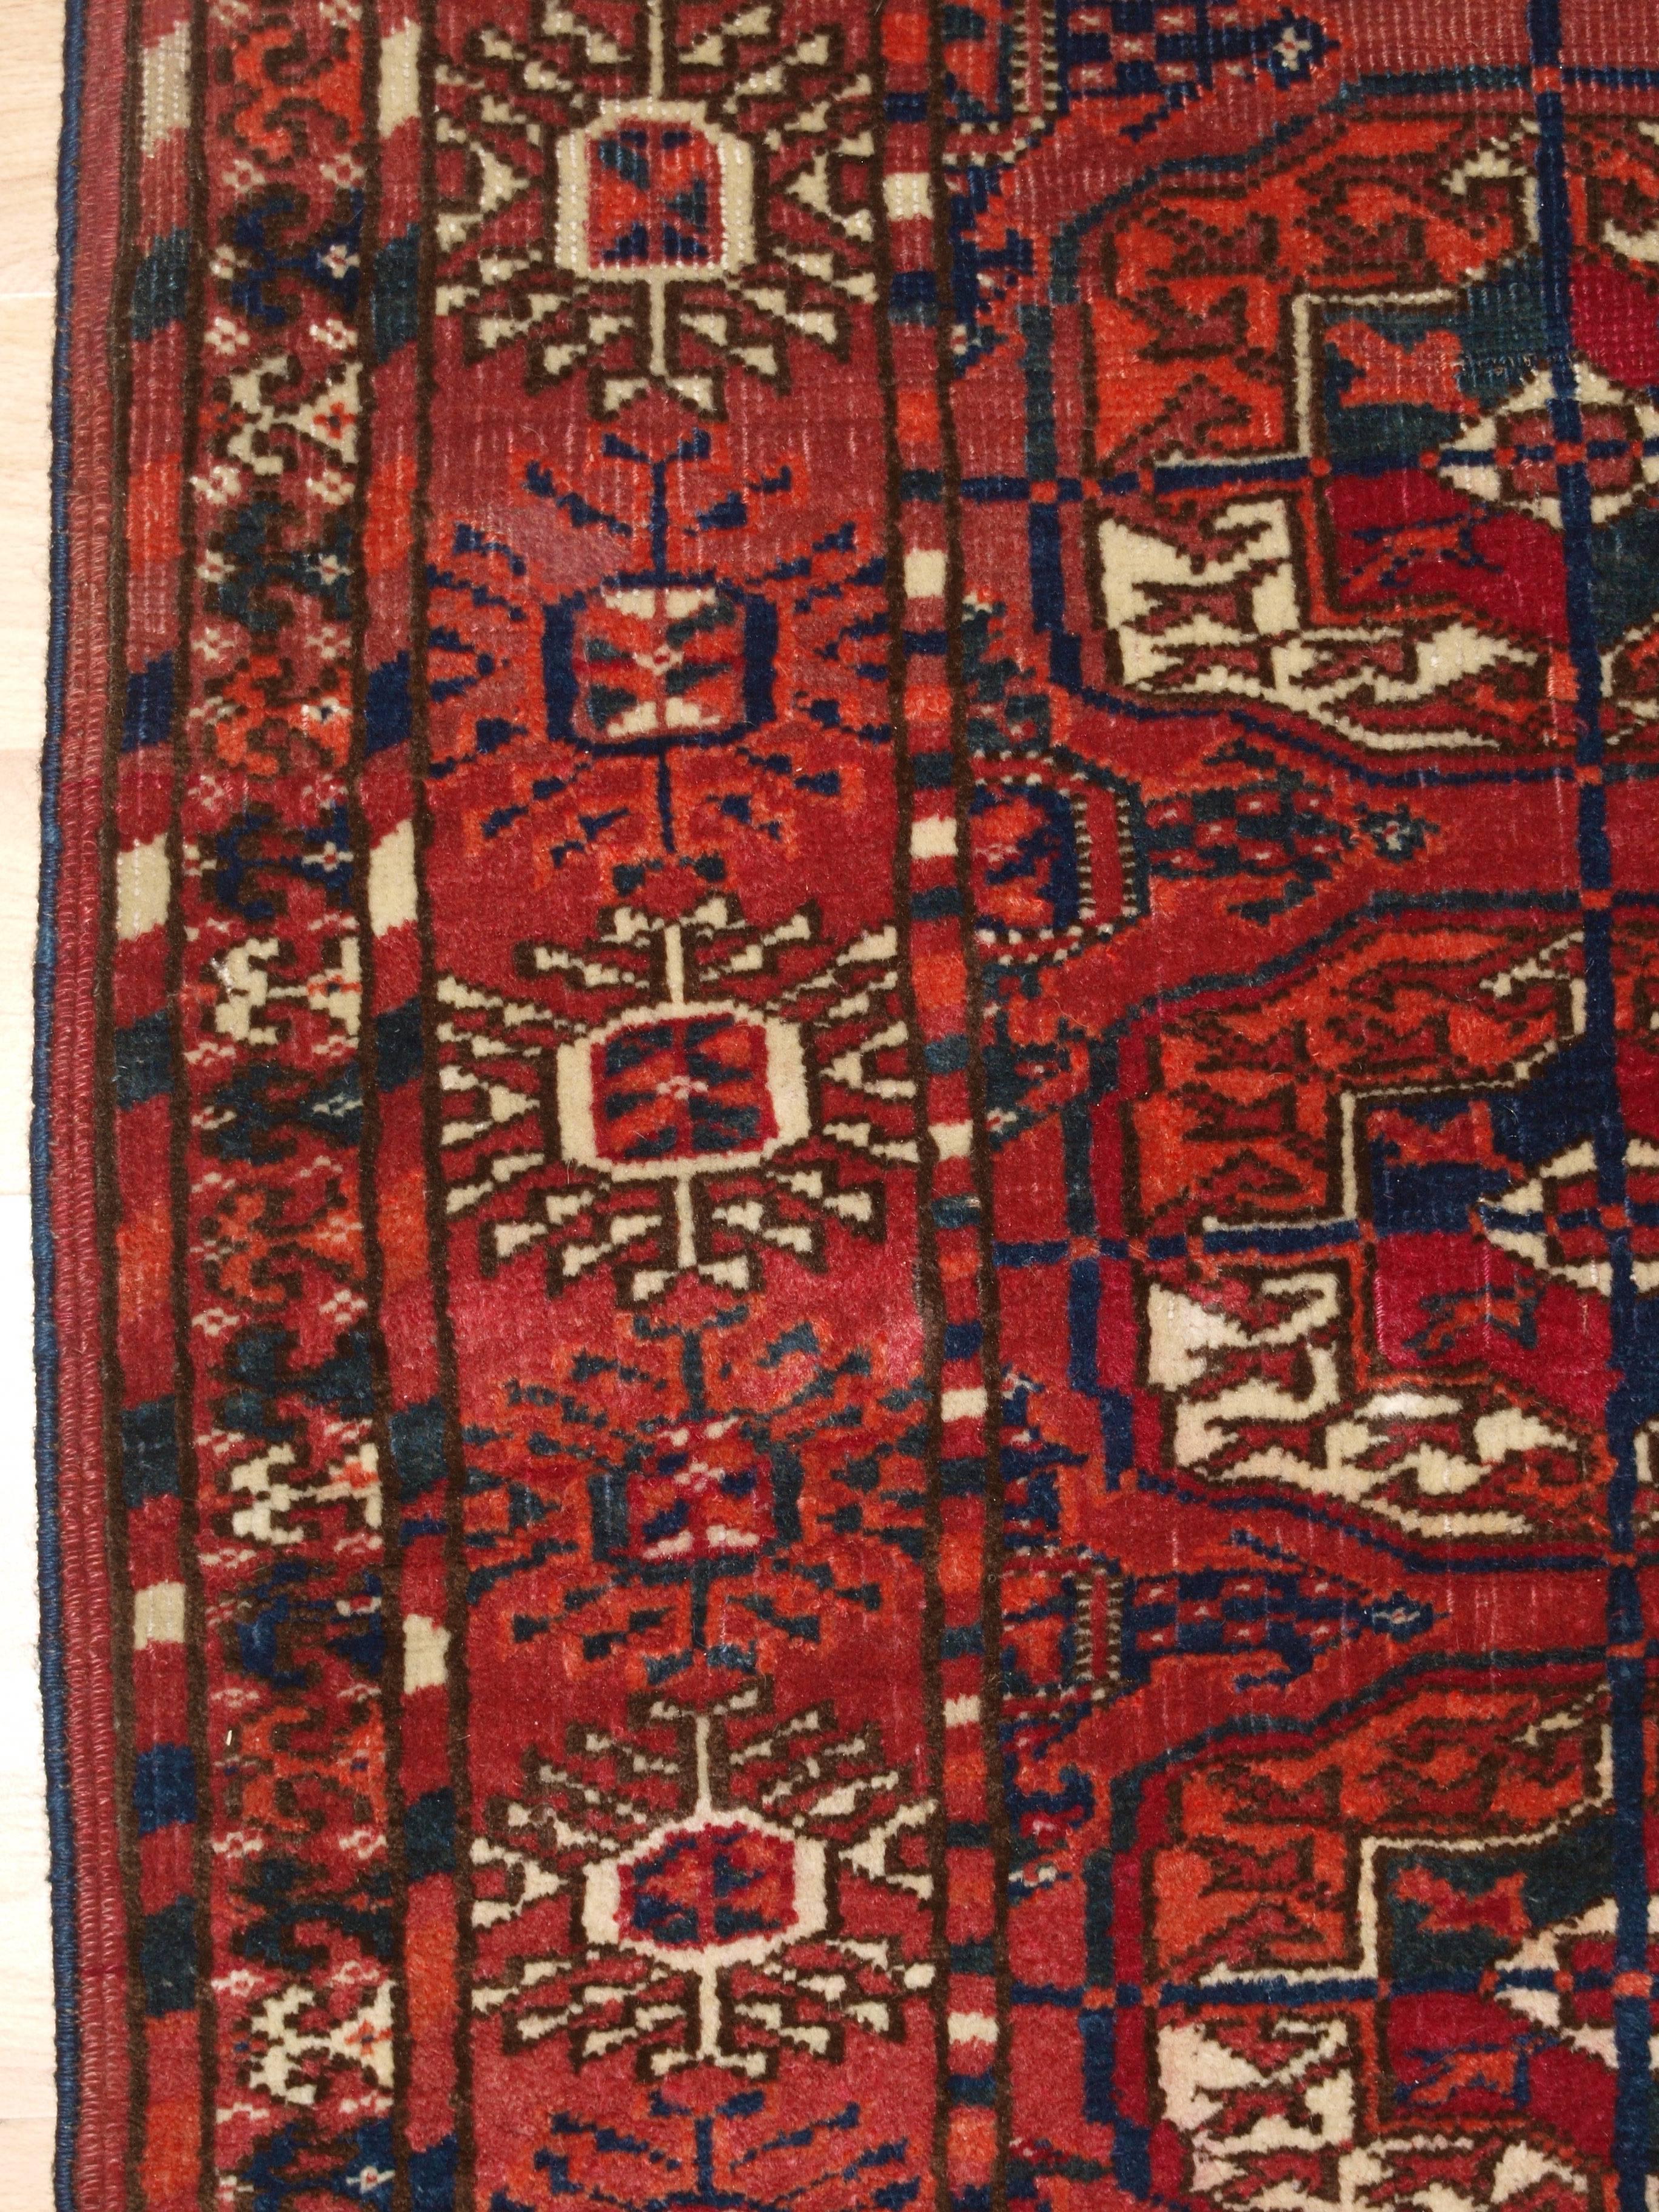 Antique Tekke Turkmen ‘dip khali’ Rug of Small Size, circa 1900 In Excellent Condition For Sale In Moreton-in-Marsh, GB